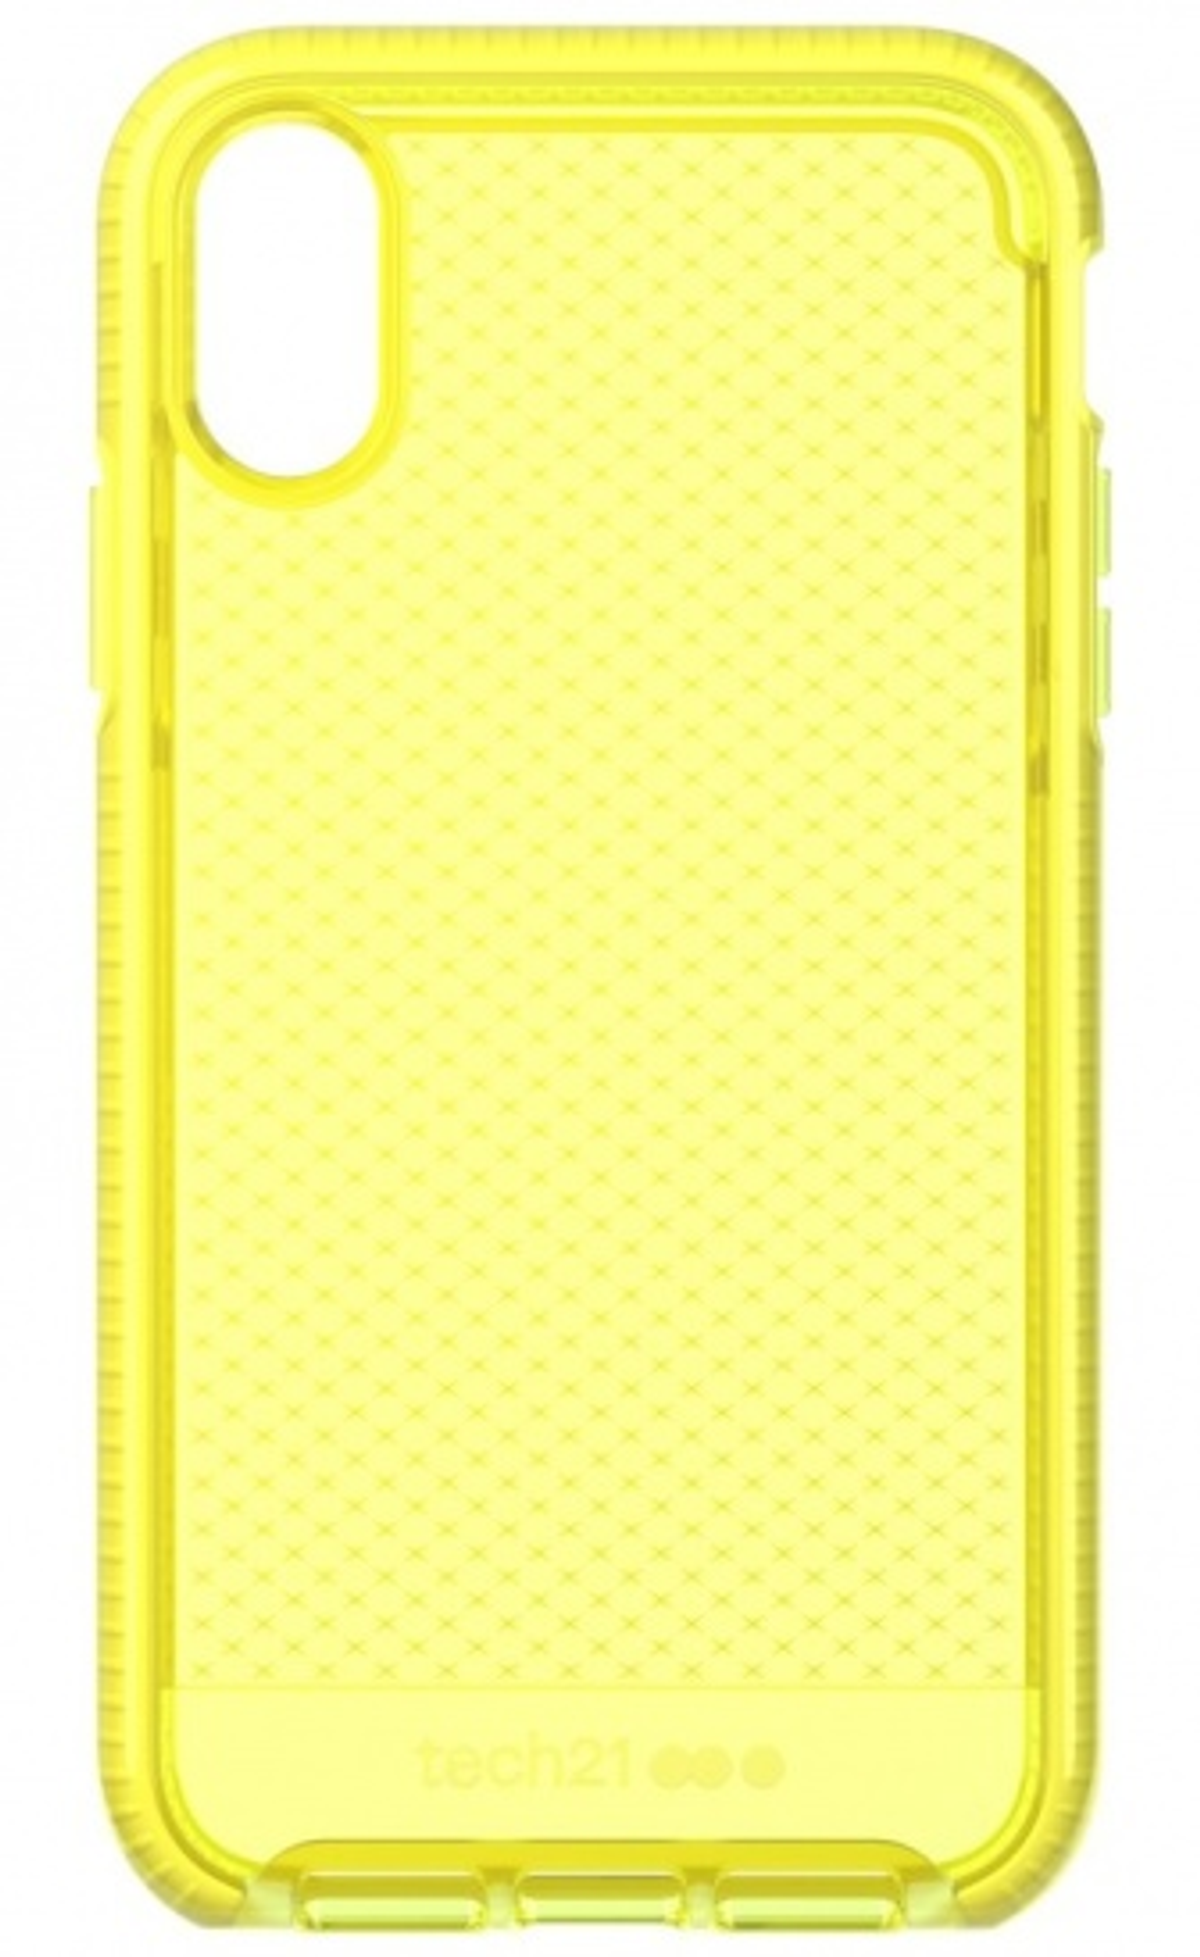 CHECK FOR - EVO IPHONE YELLOW, Bumper, NEON Rot XR TECH21 Apple, iPhone T21-6517 XR,